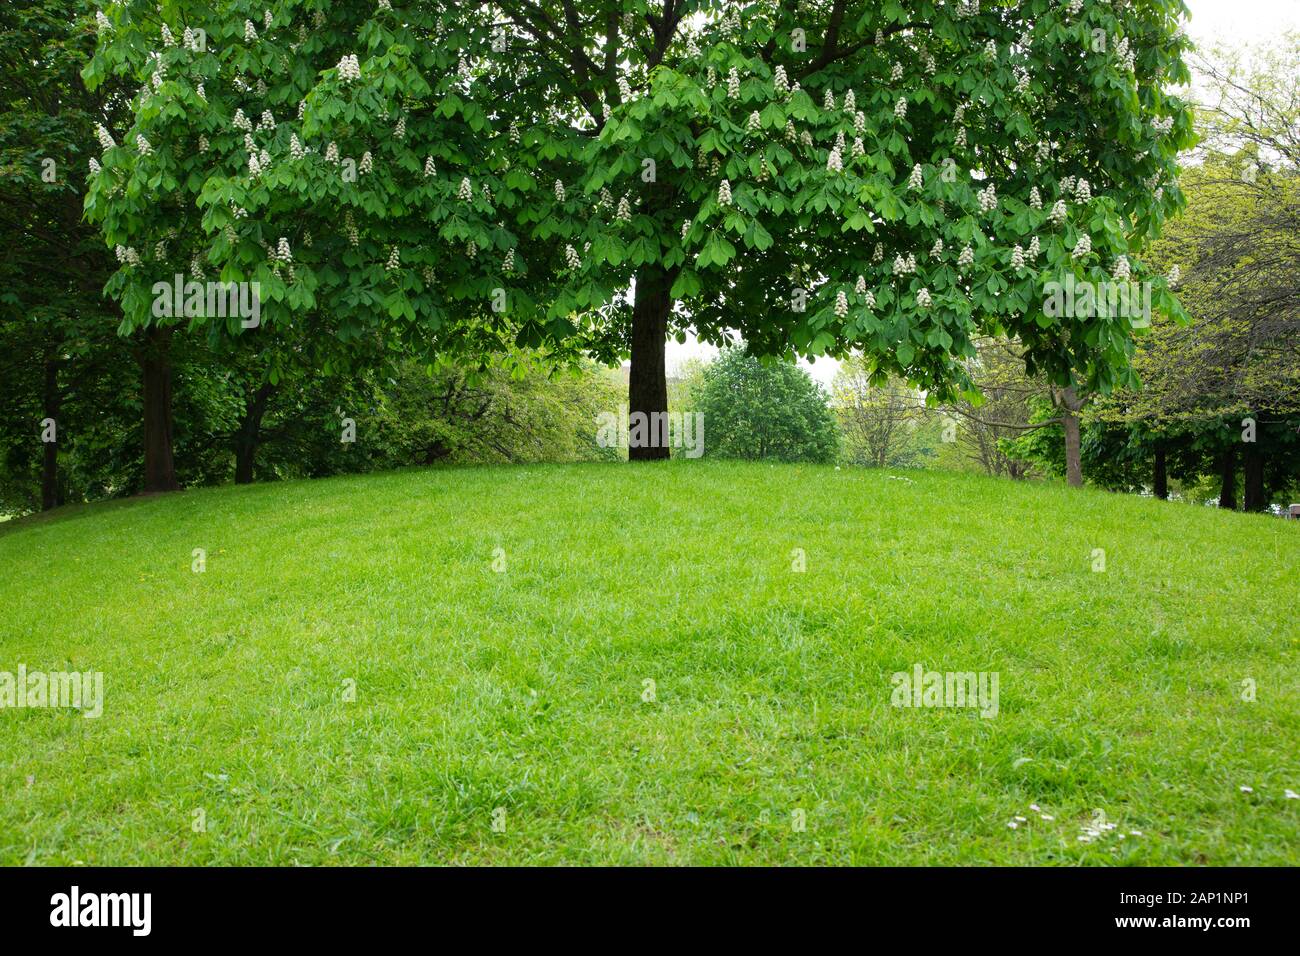 At the top of a grassy mound in Vauxhall Gardens, a London park, is a Horse chestnut tree with its white flower spikes standing up like candlesticks. Stock Photo